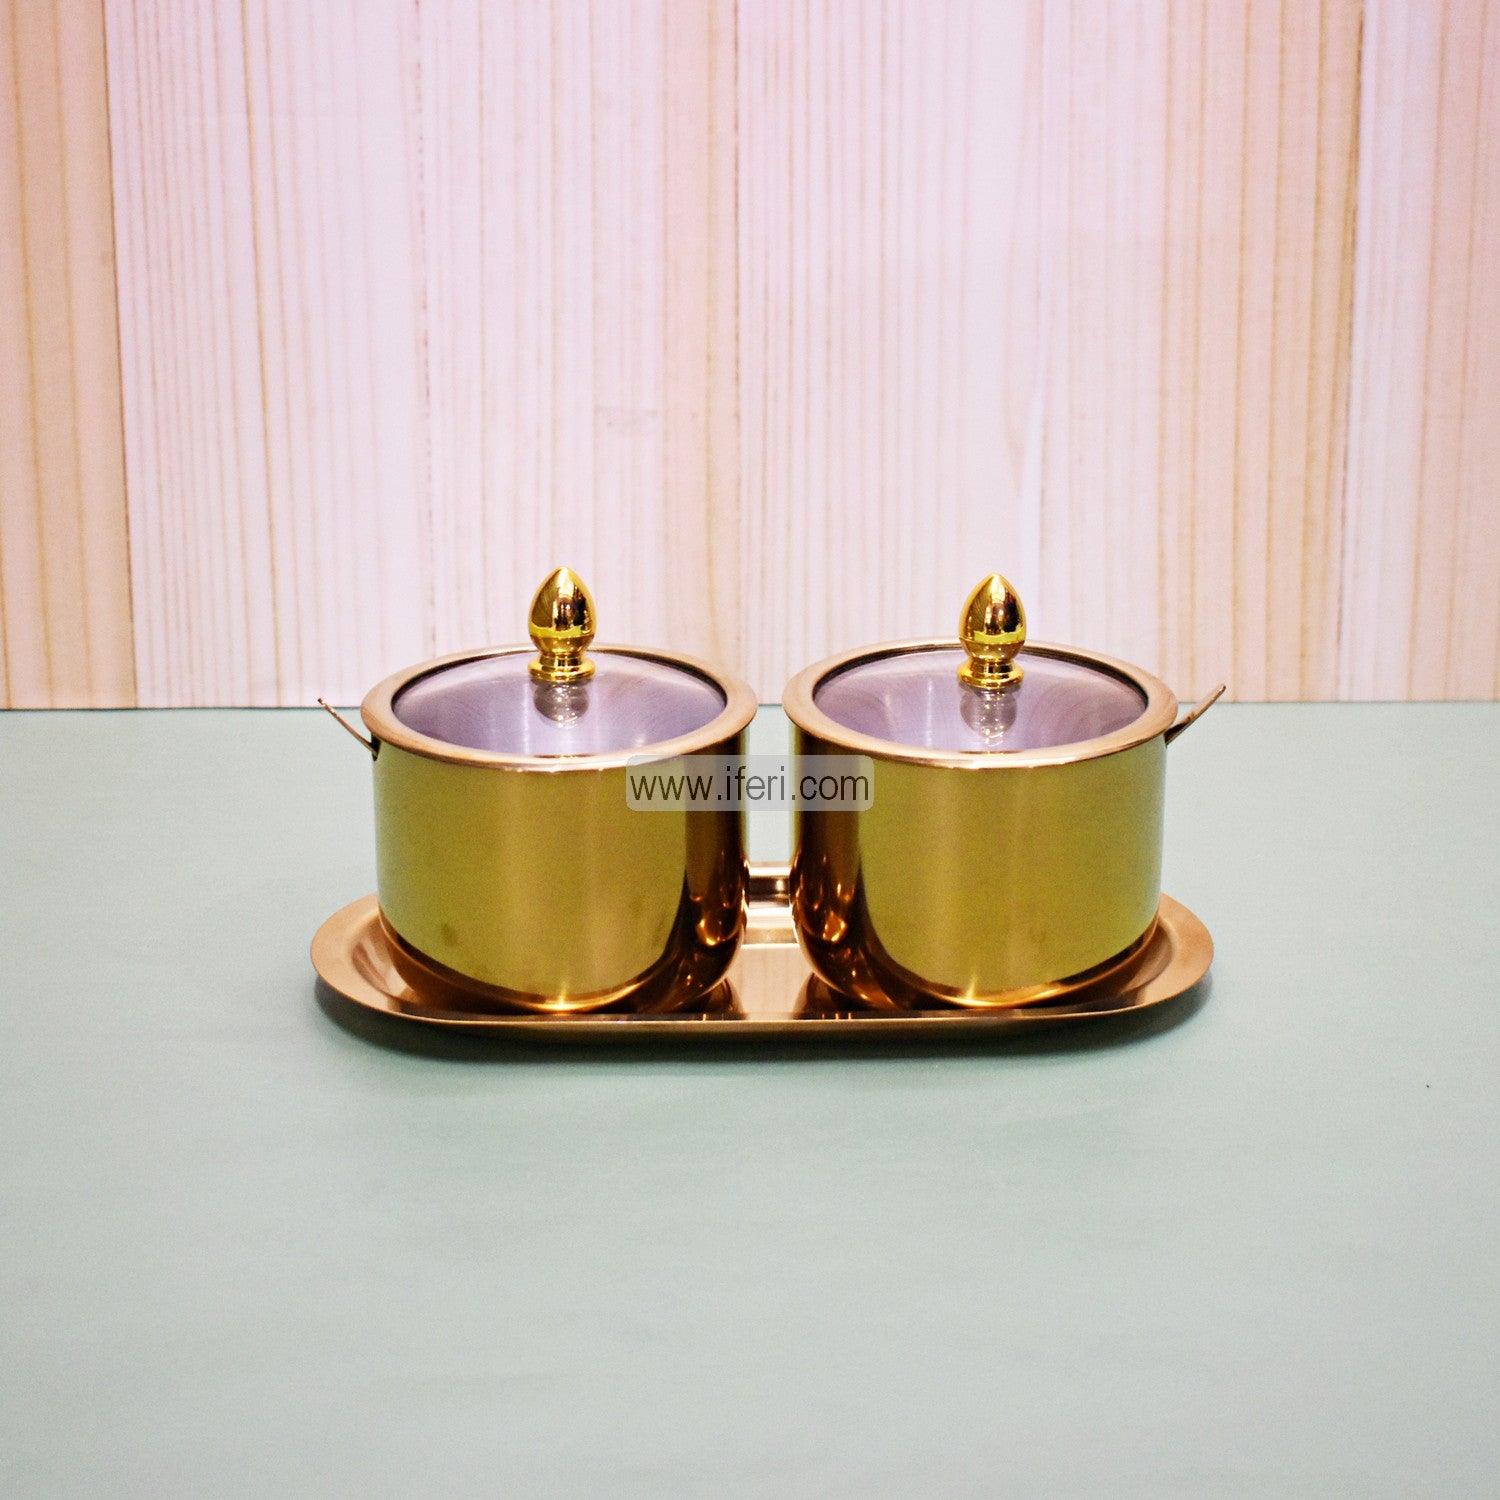 2 Pcs Stainless Steel Spice Jar with Tray FH0778 Price in Bangladesh - iferi.com